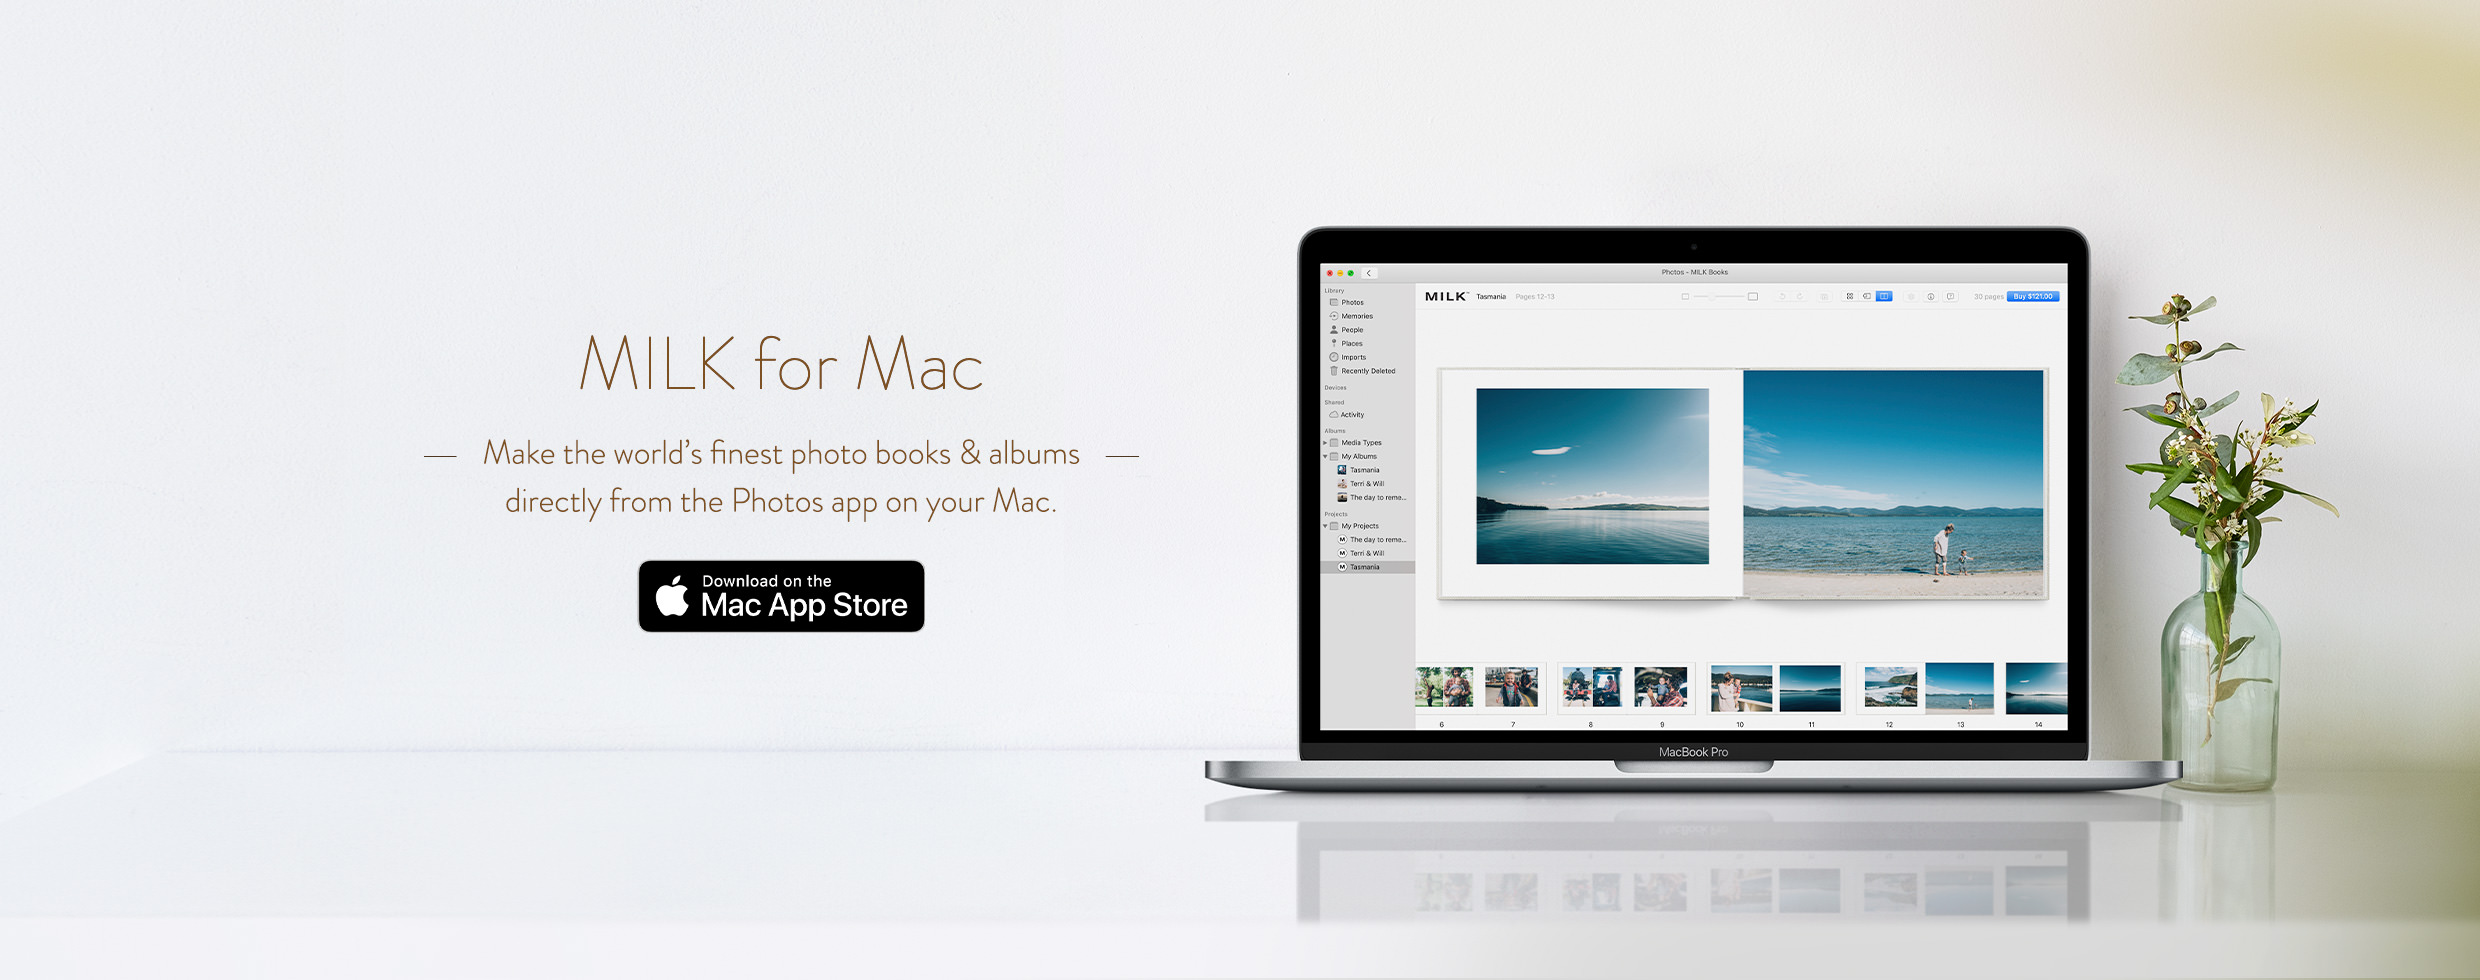 MILK for Mac - Make the world's finest photo books & albums directly from the Photos app on your Mac.